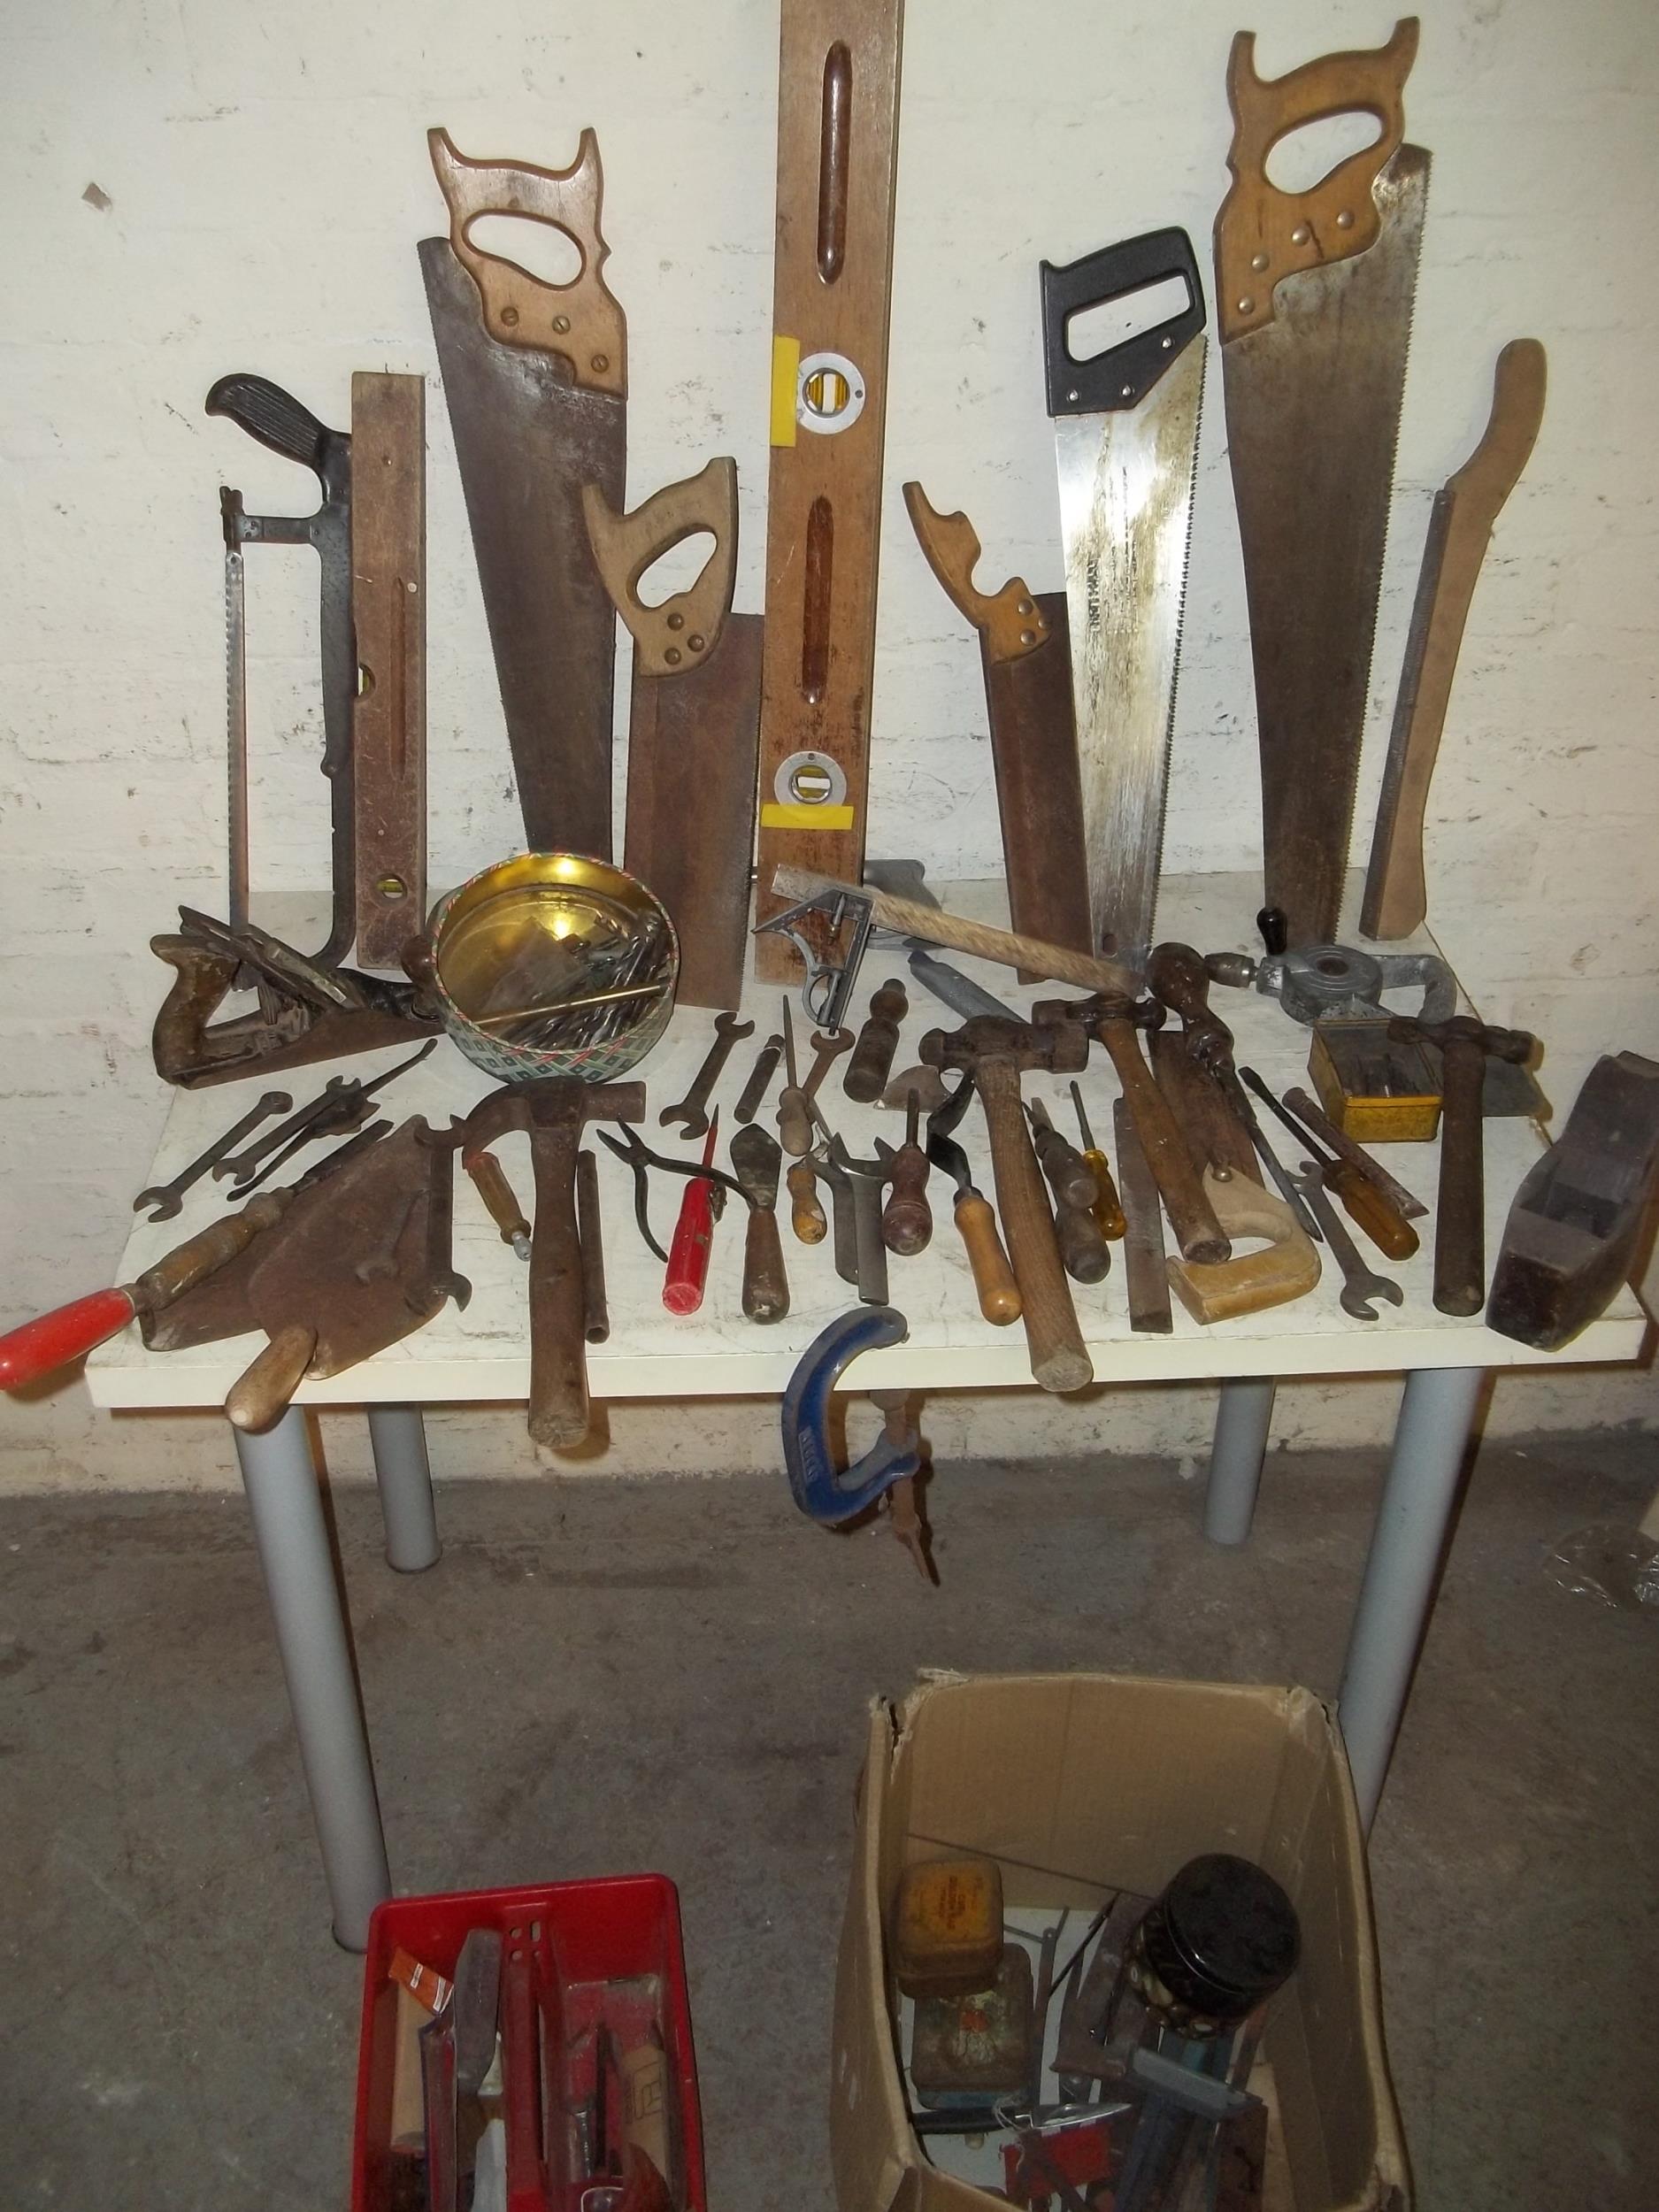 A LARGE SELECTION OF VINTAGE TOOLS